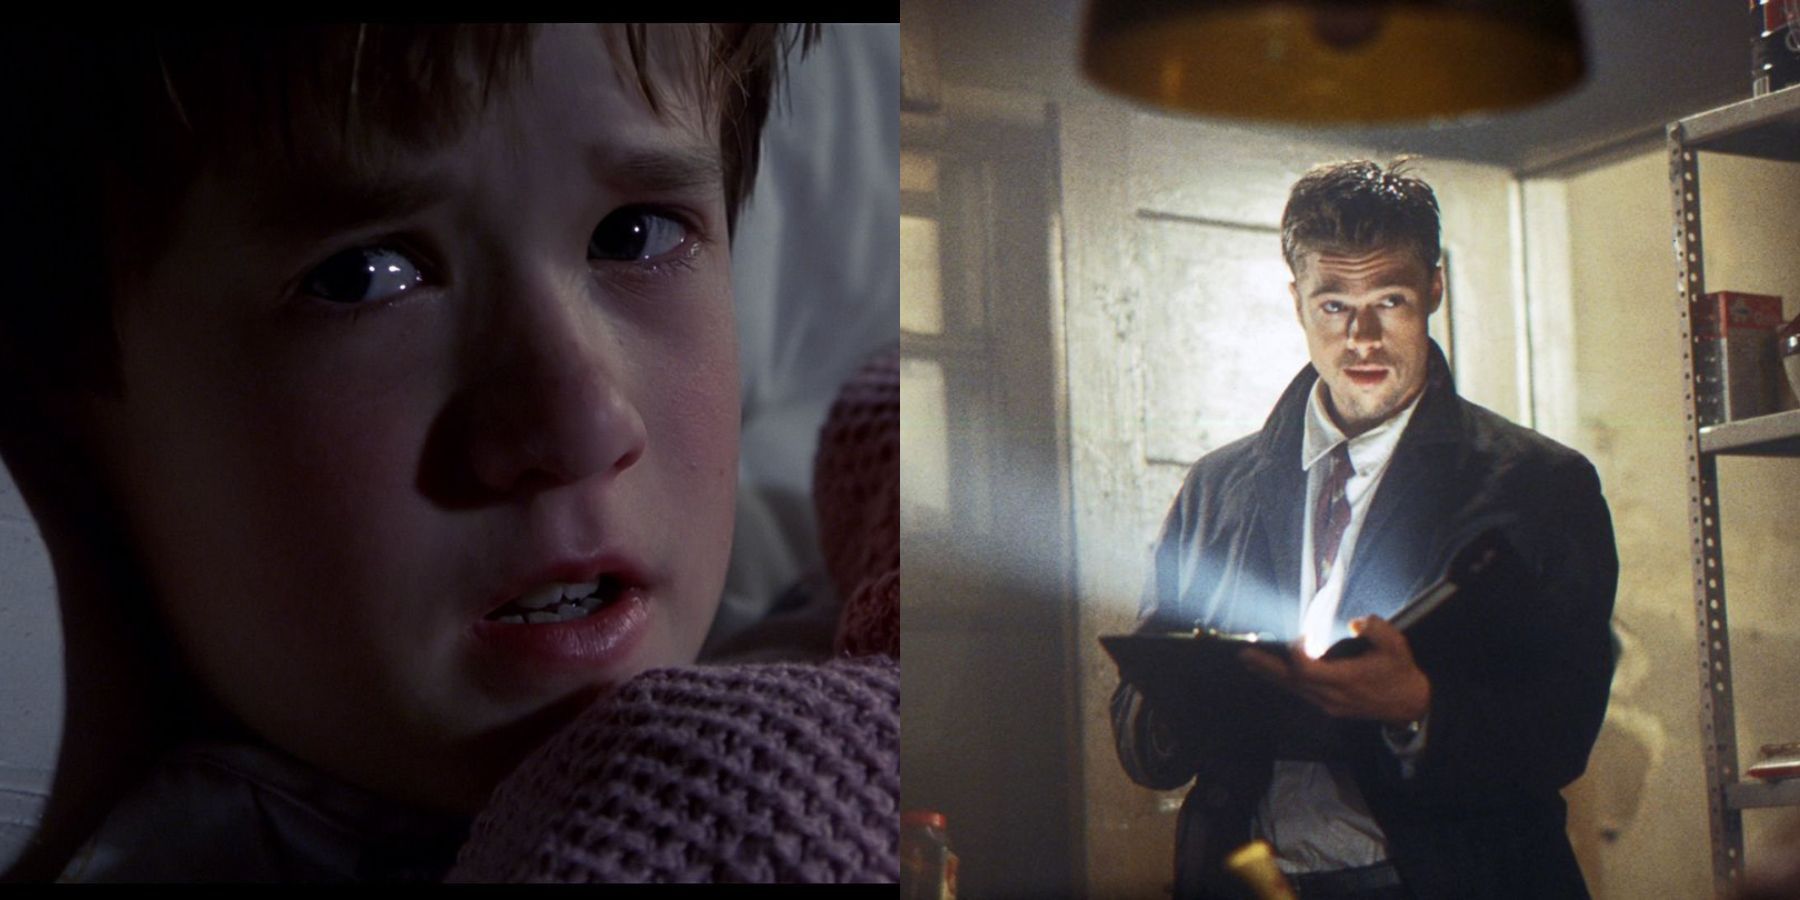 The Sixth Sense and Se7en are 90s horror movies with ultimate ending twists